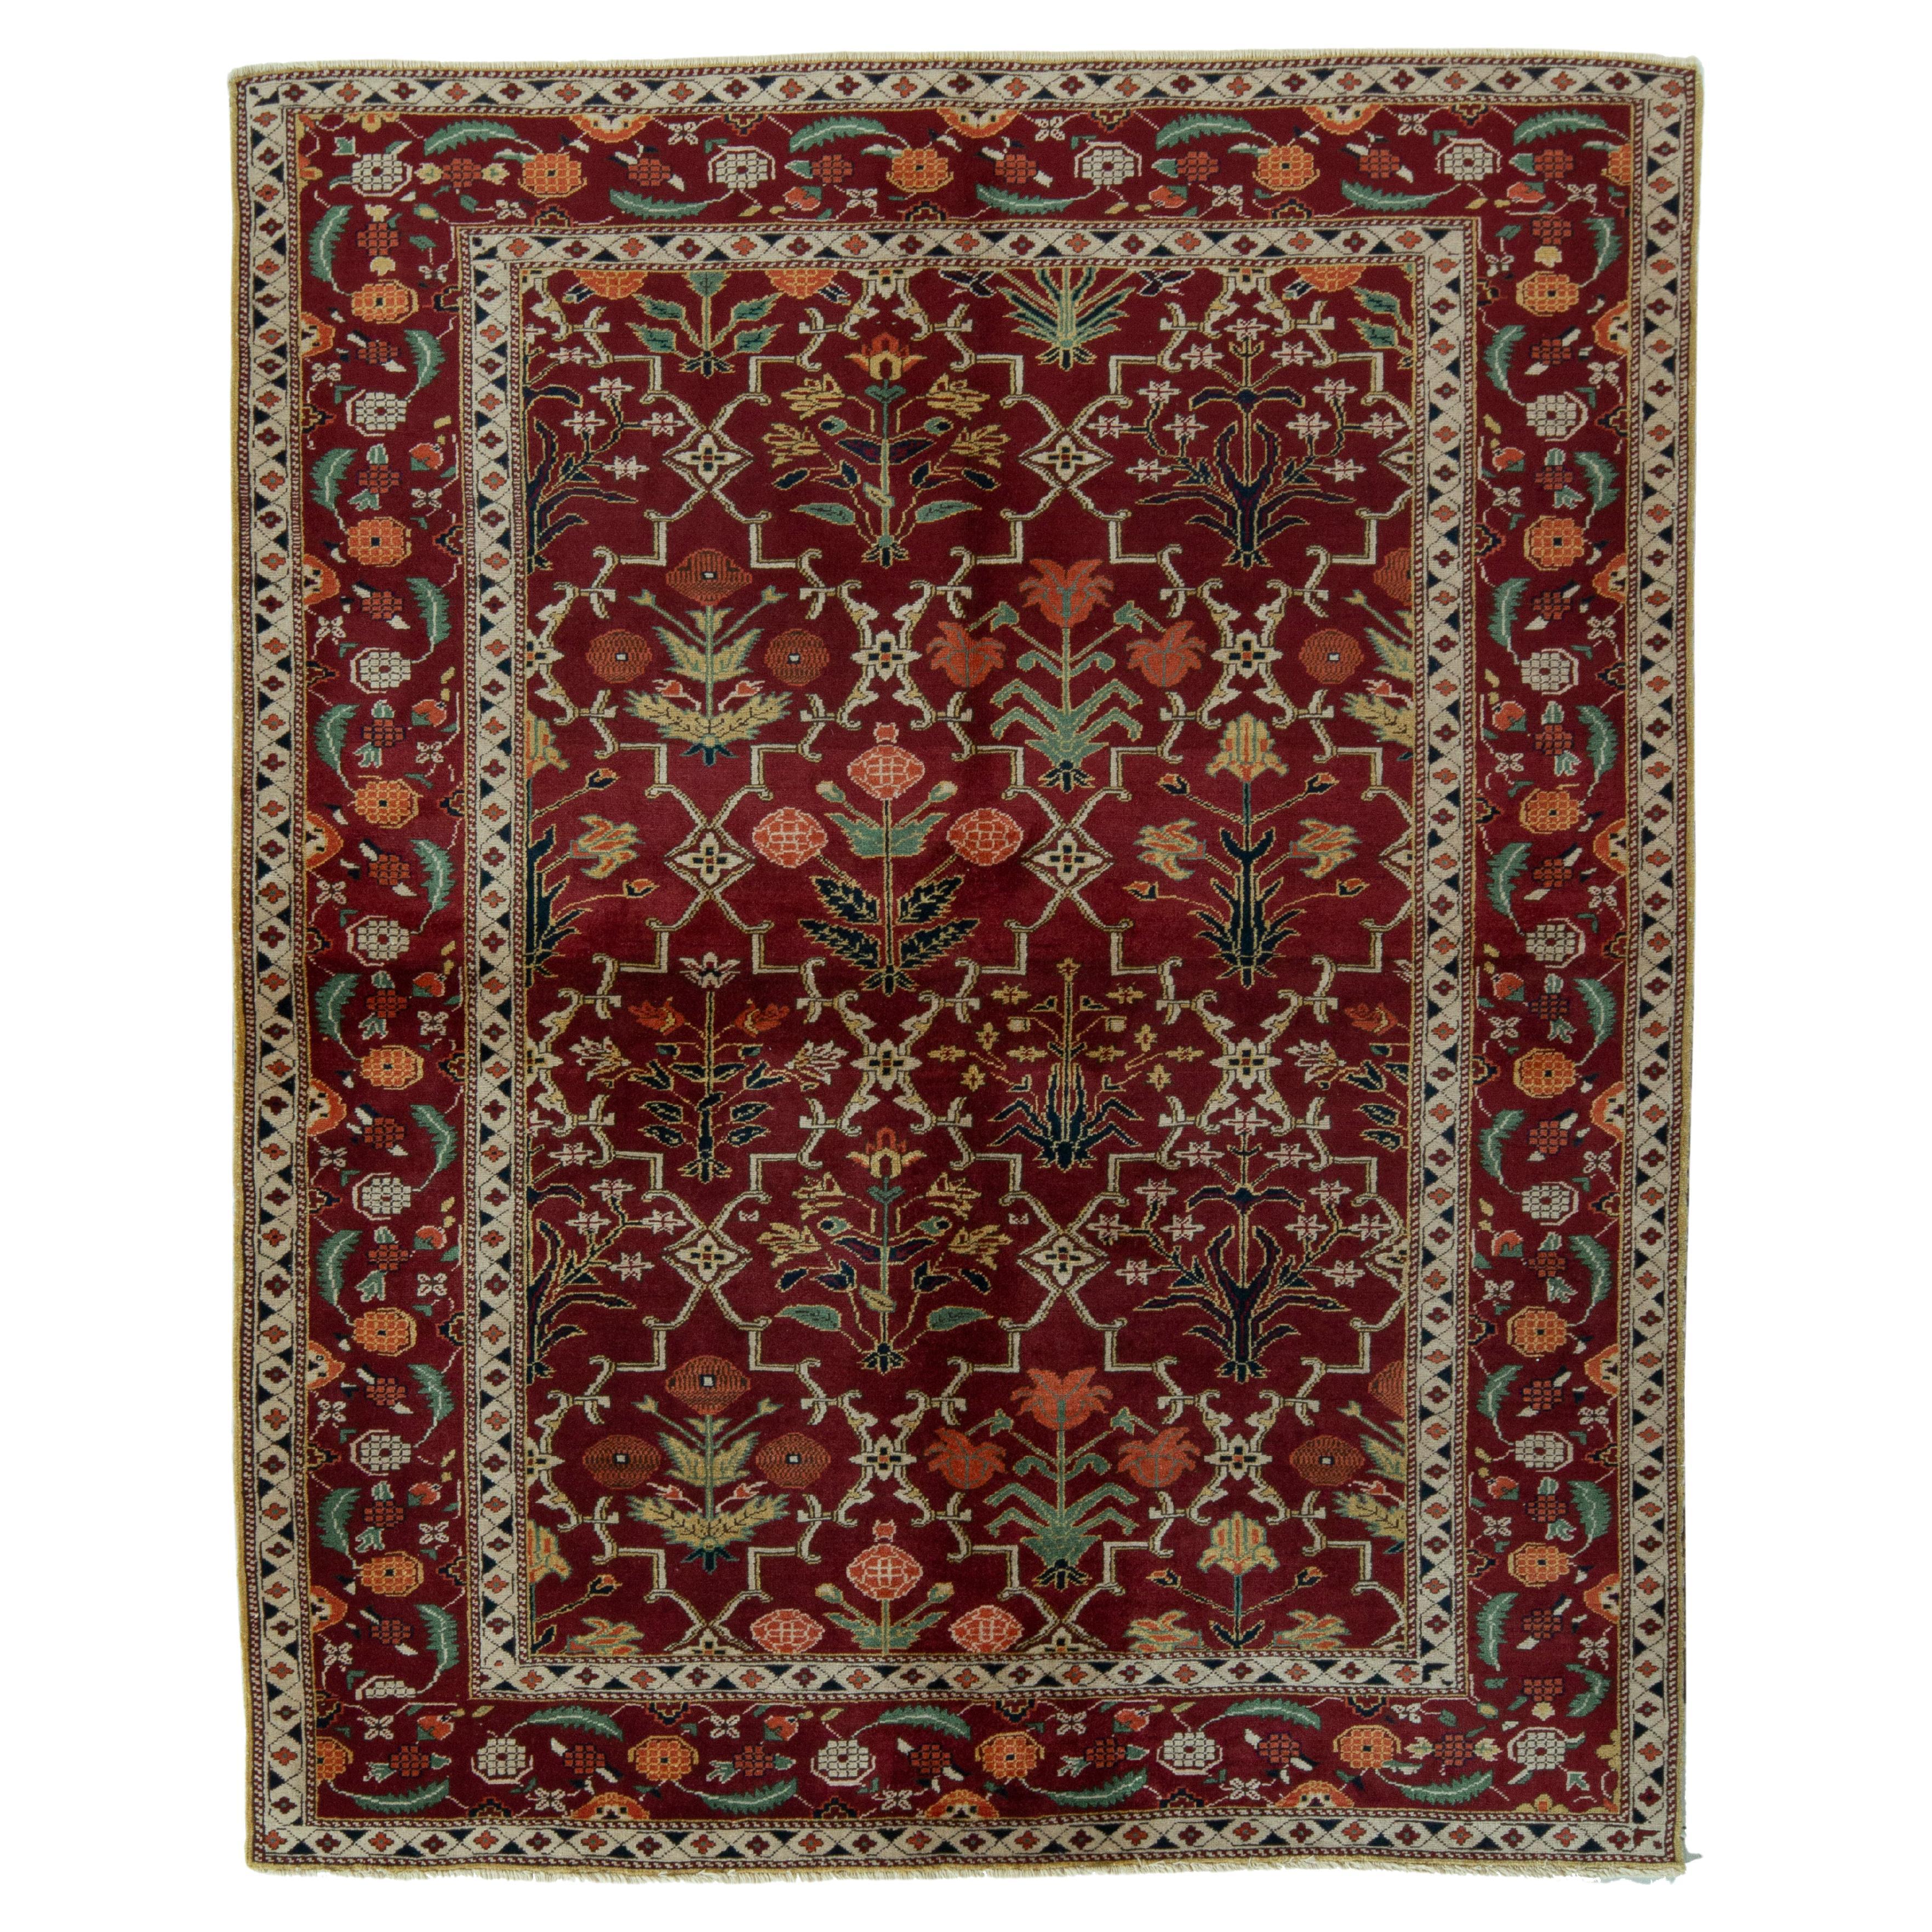 Rug & Kilim’s Agra Style Rug in an All over Red, Green Trellis Floral Pattern For Sale